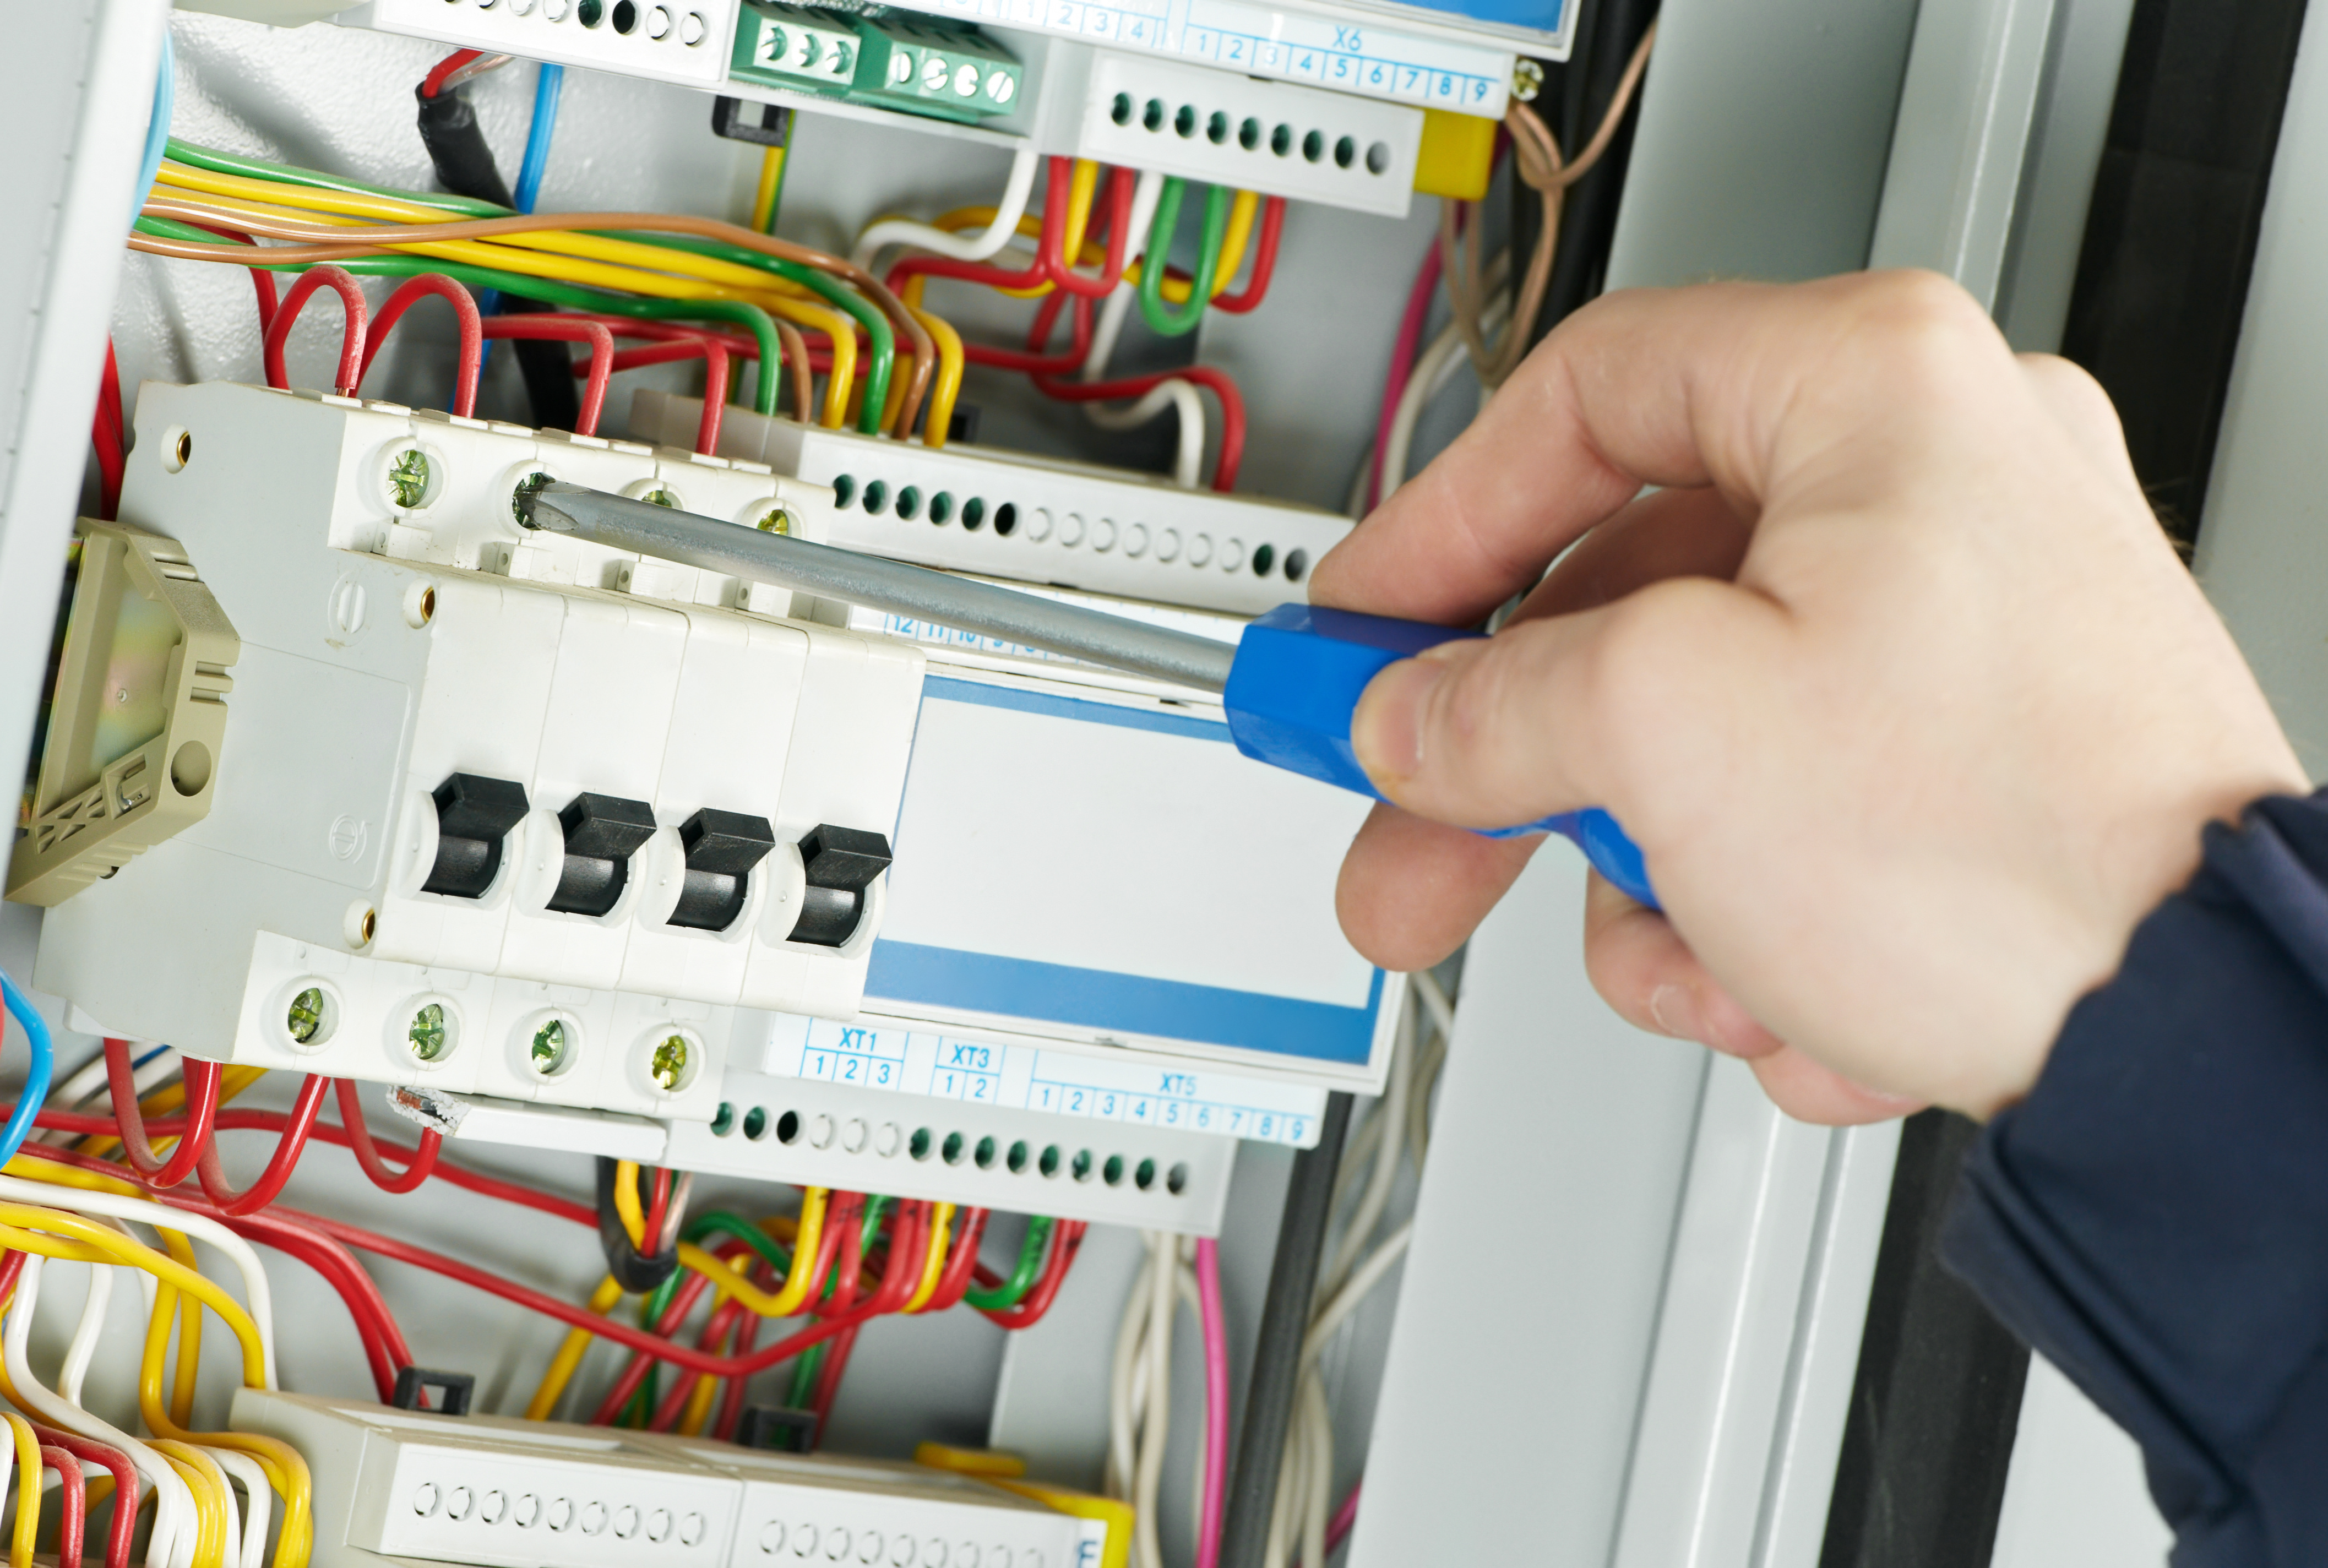 electrician testing wires in a system to show that you should ensure your building's electrical system is safe with fixed wire testing